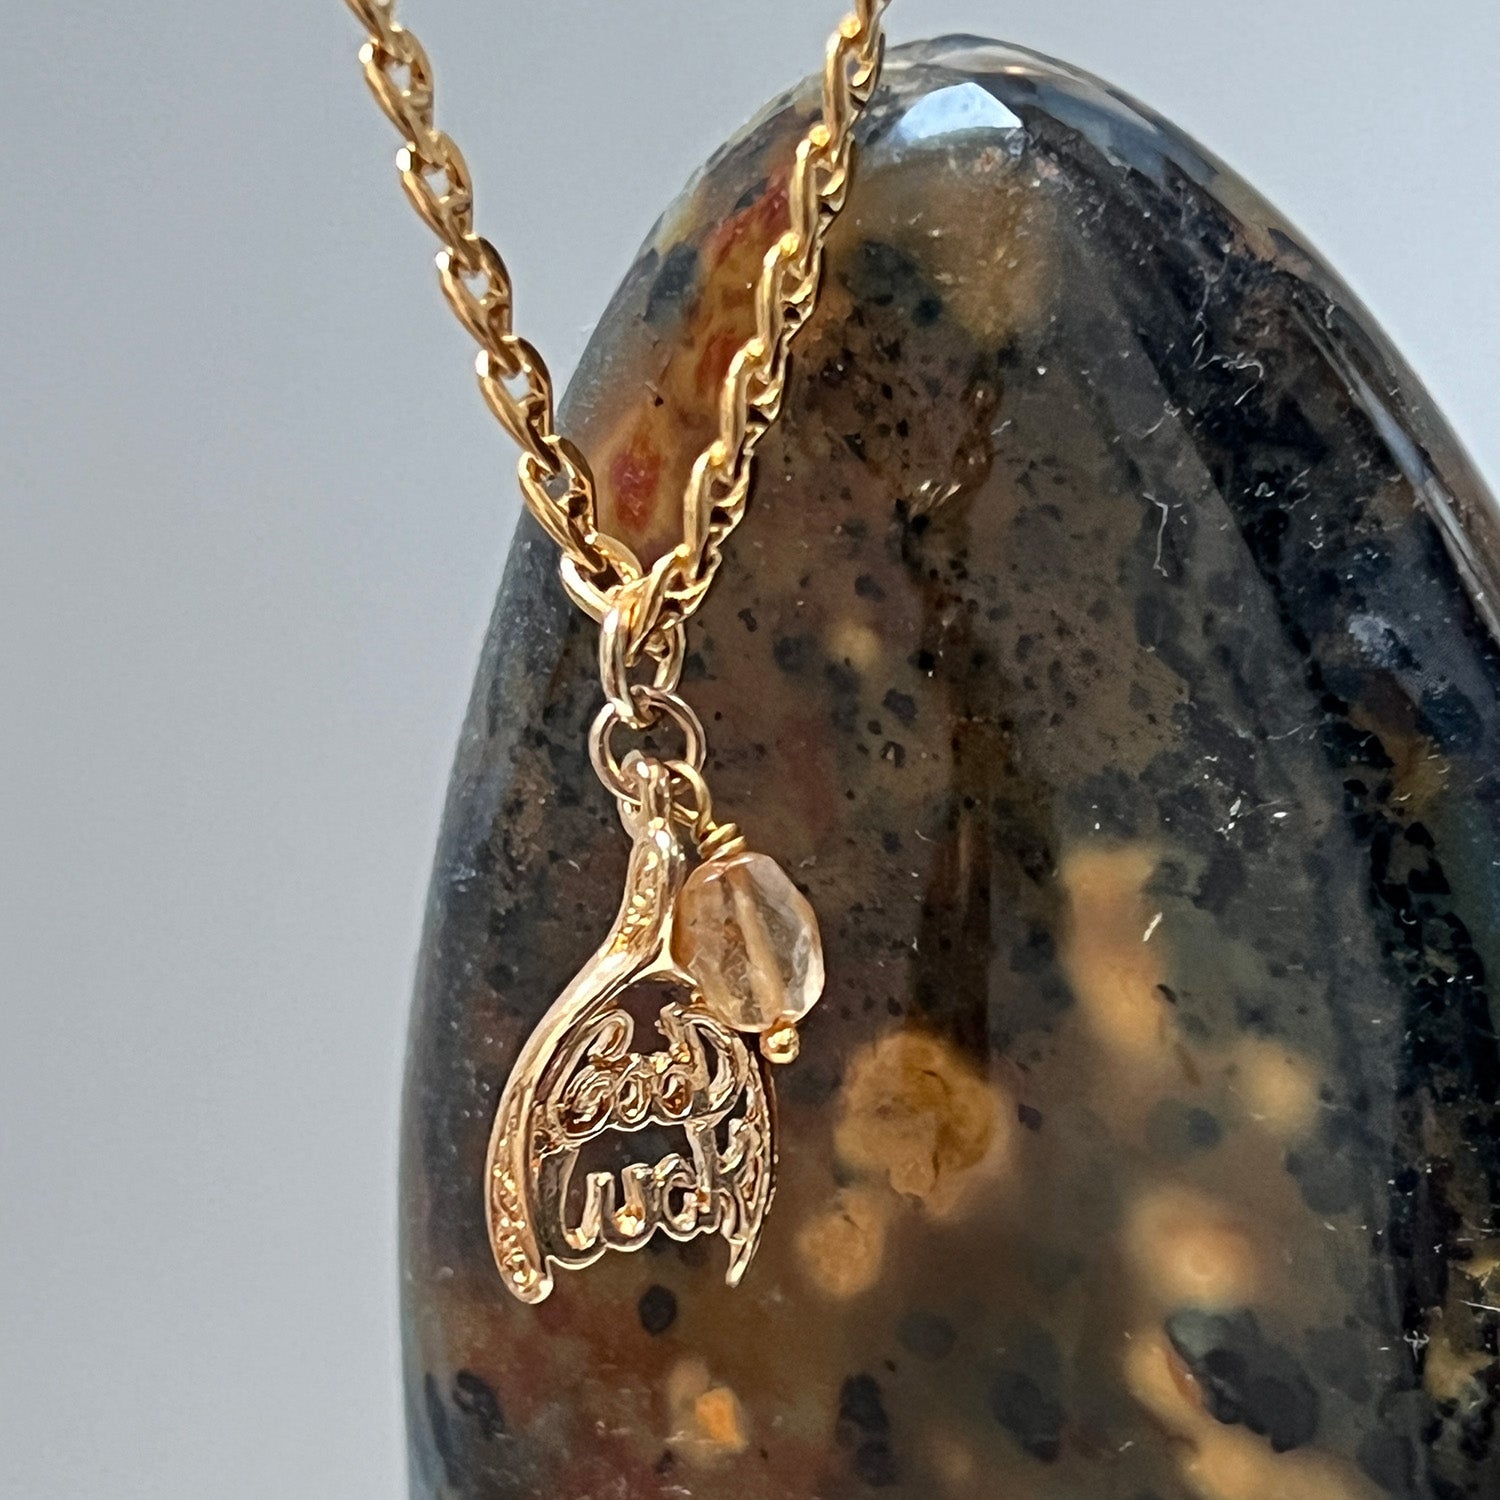 Good Luck Charm Pendant With Gourmet Flat Chain